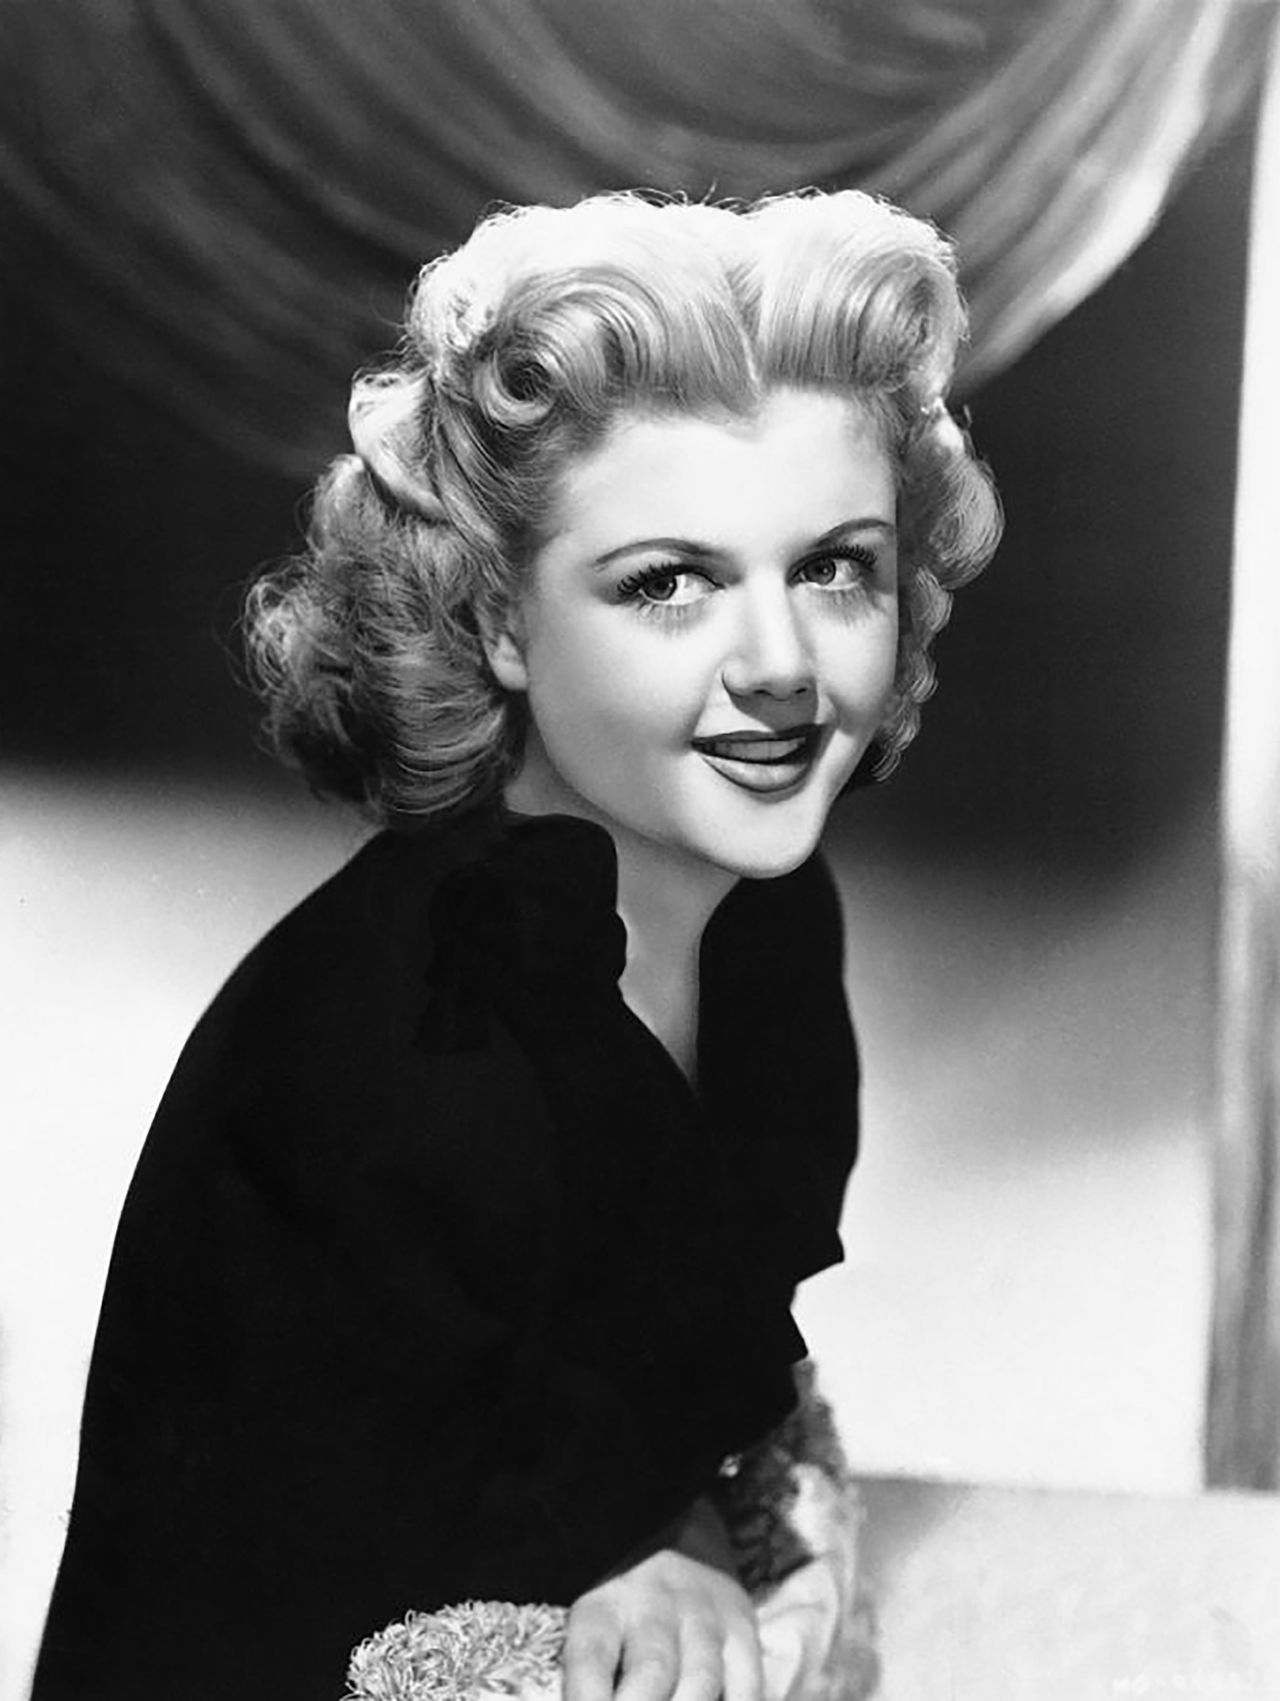 Lansbury, seen here in 1945, moved to United States from England in 1940. In 1943, she signed a seven-year contract with MGM.